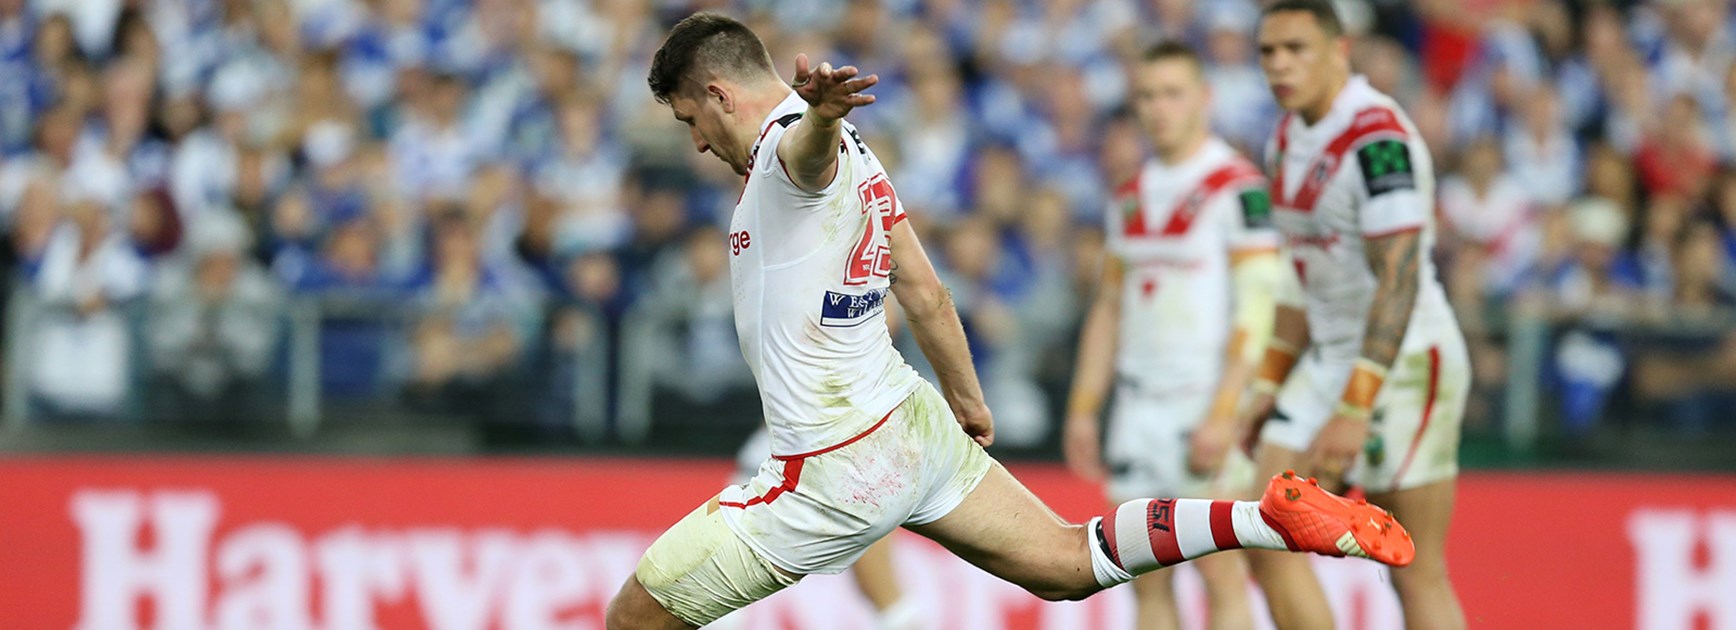 Dragons five-eighth Gareth Widdop kicks for goal in the Elimination Final against the Bulldogs.